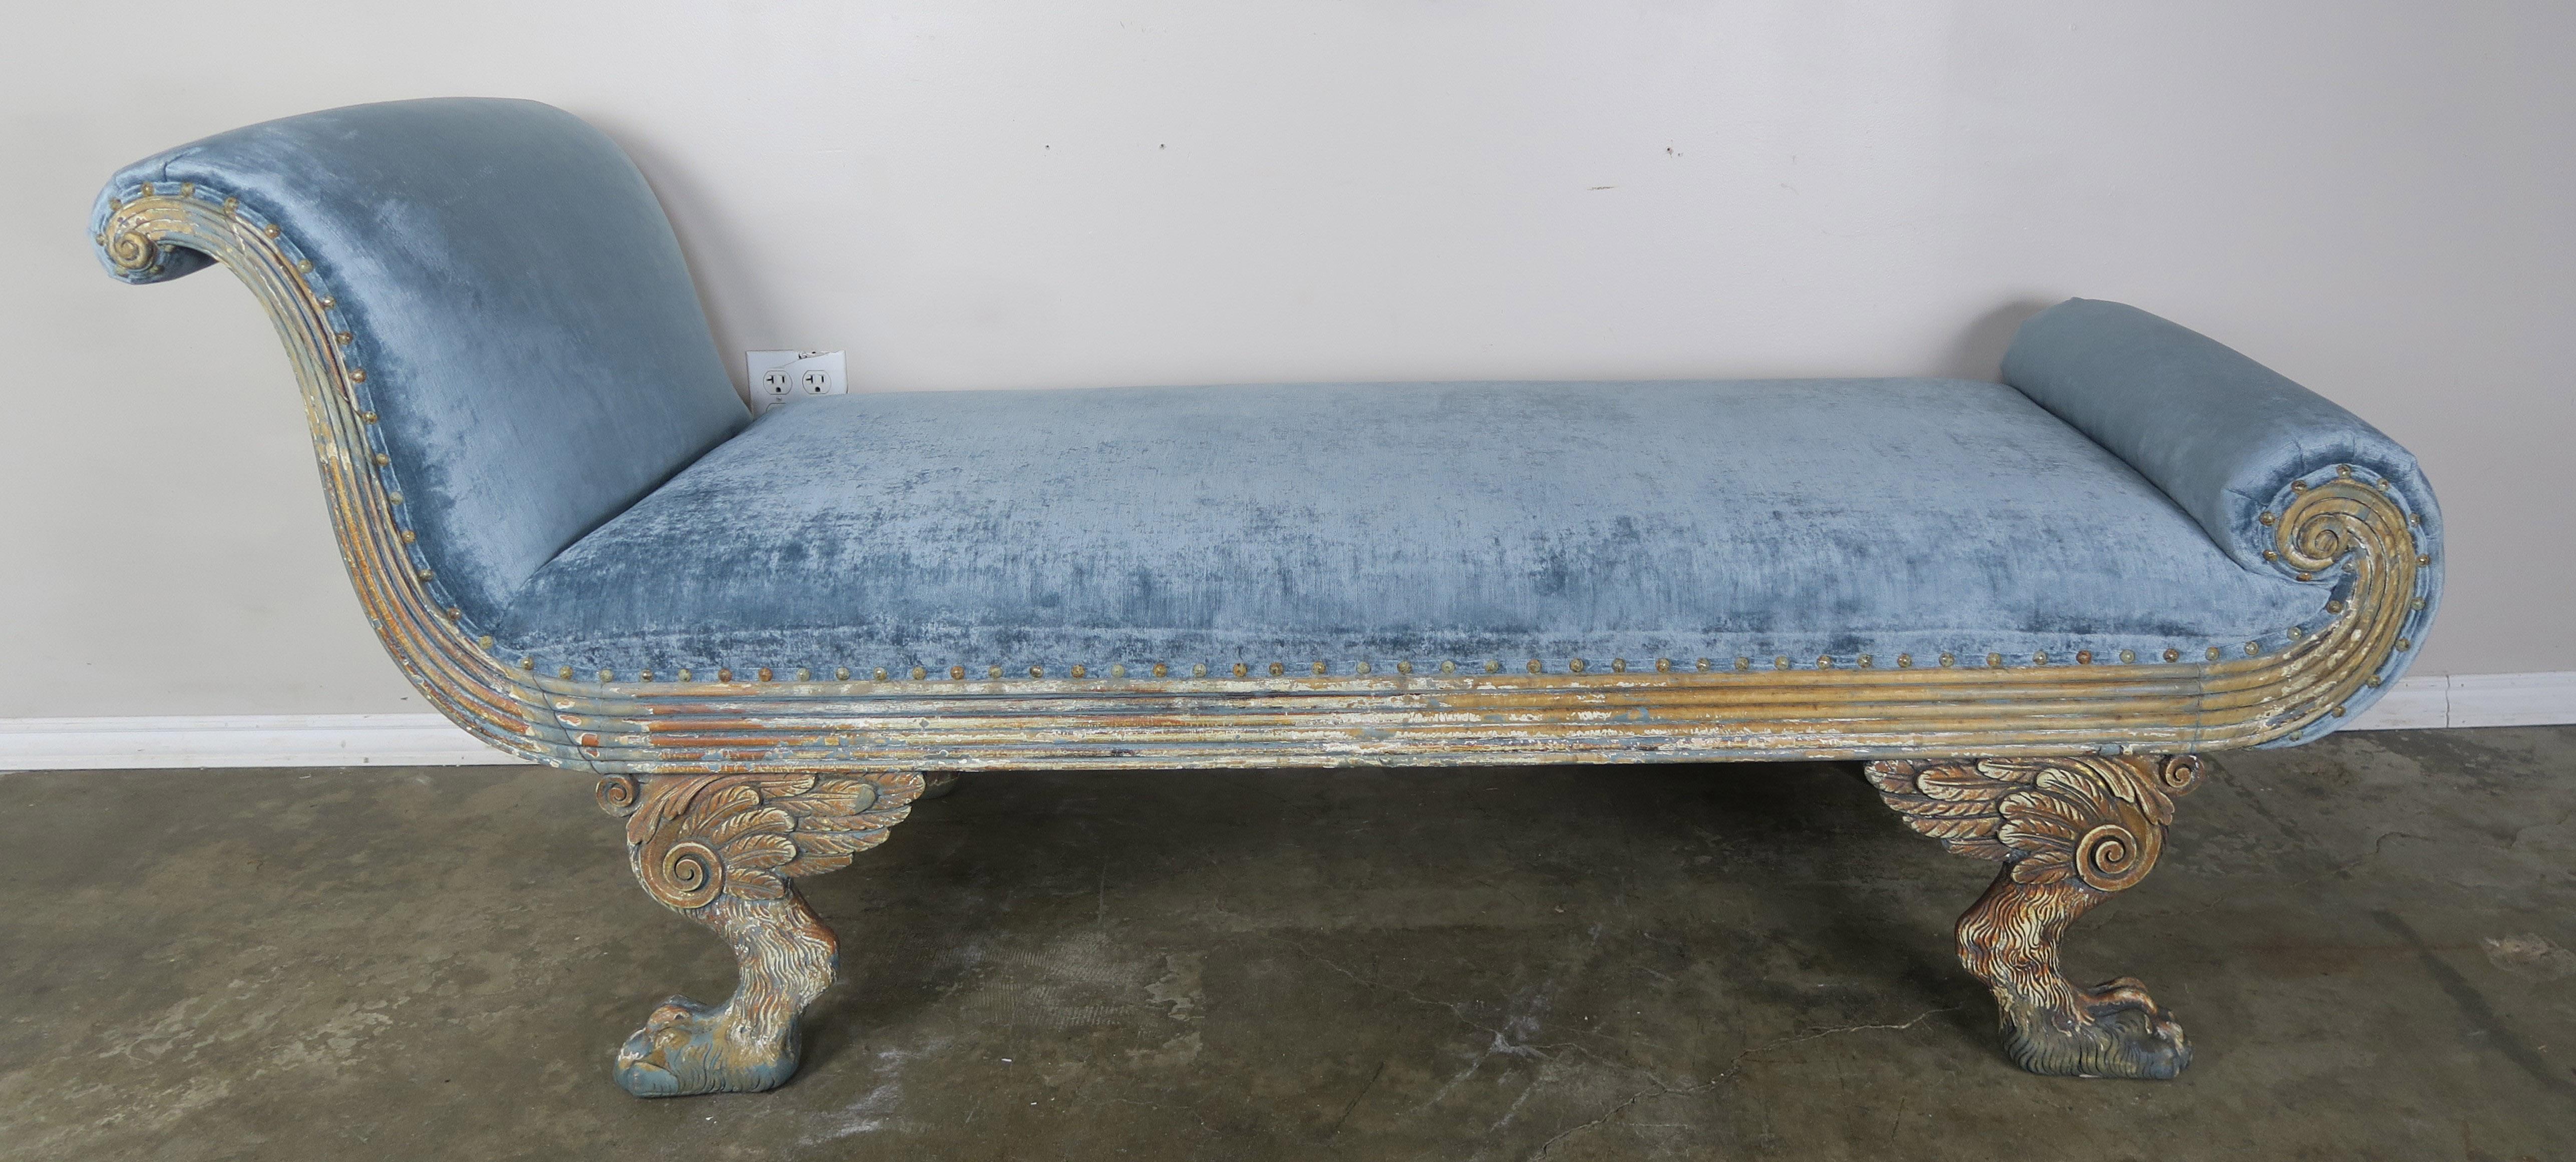 Carved wood painted chaise lounge that stands on four Duncan Phyfe style feet with winged lion's paws. The Chaise is newly upholstered in a blue linen velvet with self welt and nailhead trim detail.
Seat height 20